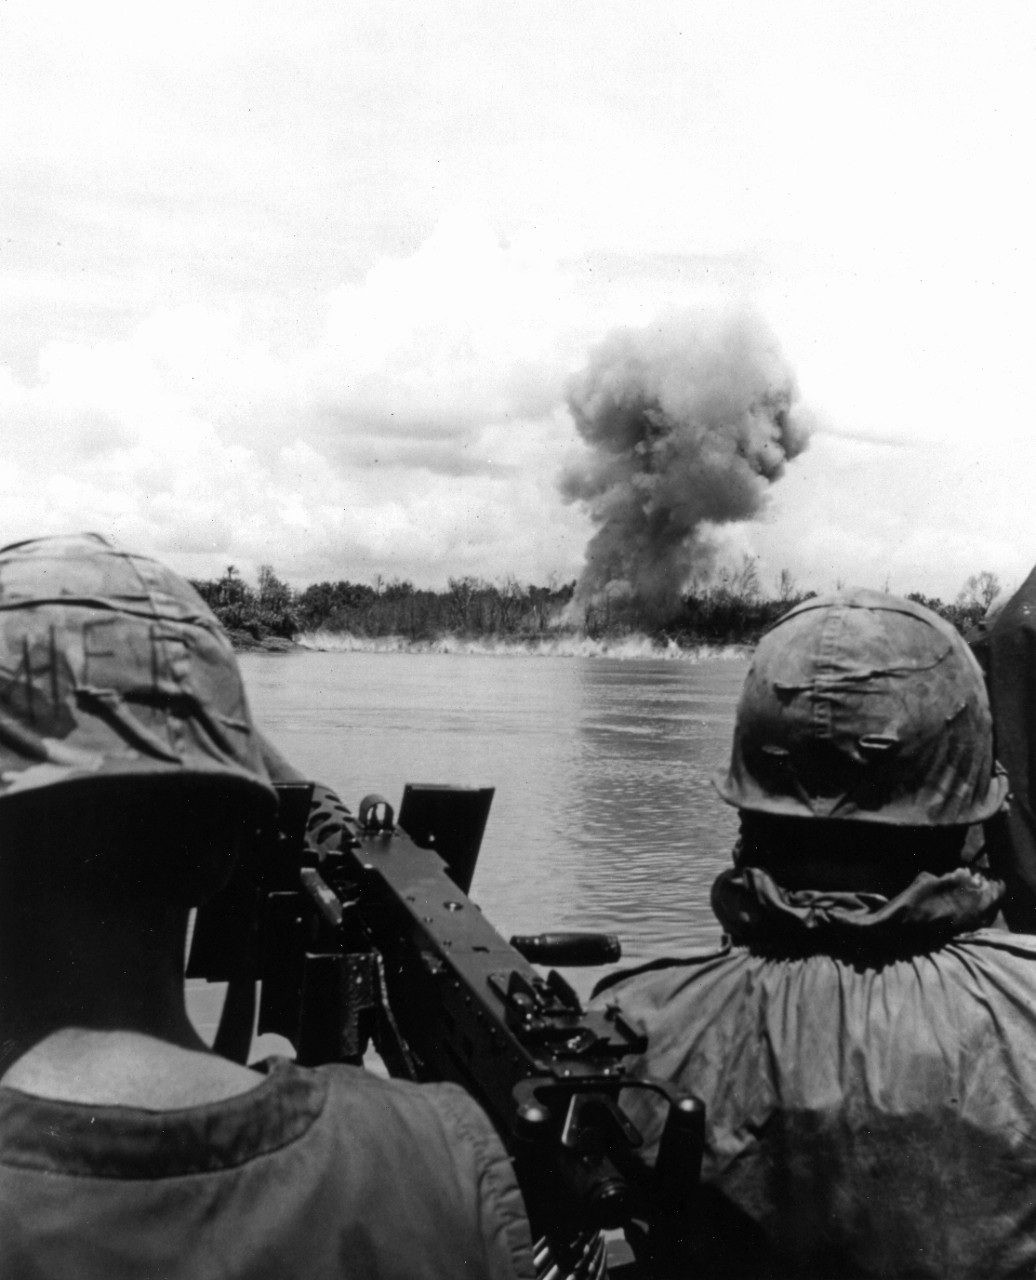 From a converted "Mike" boat on the Mekong River, which has picked them up following a search and destroy operation, Navy SEALs watch the detonation of a satchel charge they set to destroy a Viet Cong bunker, September 1967.